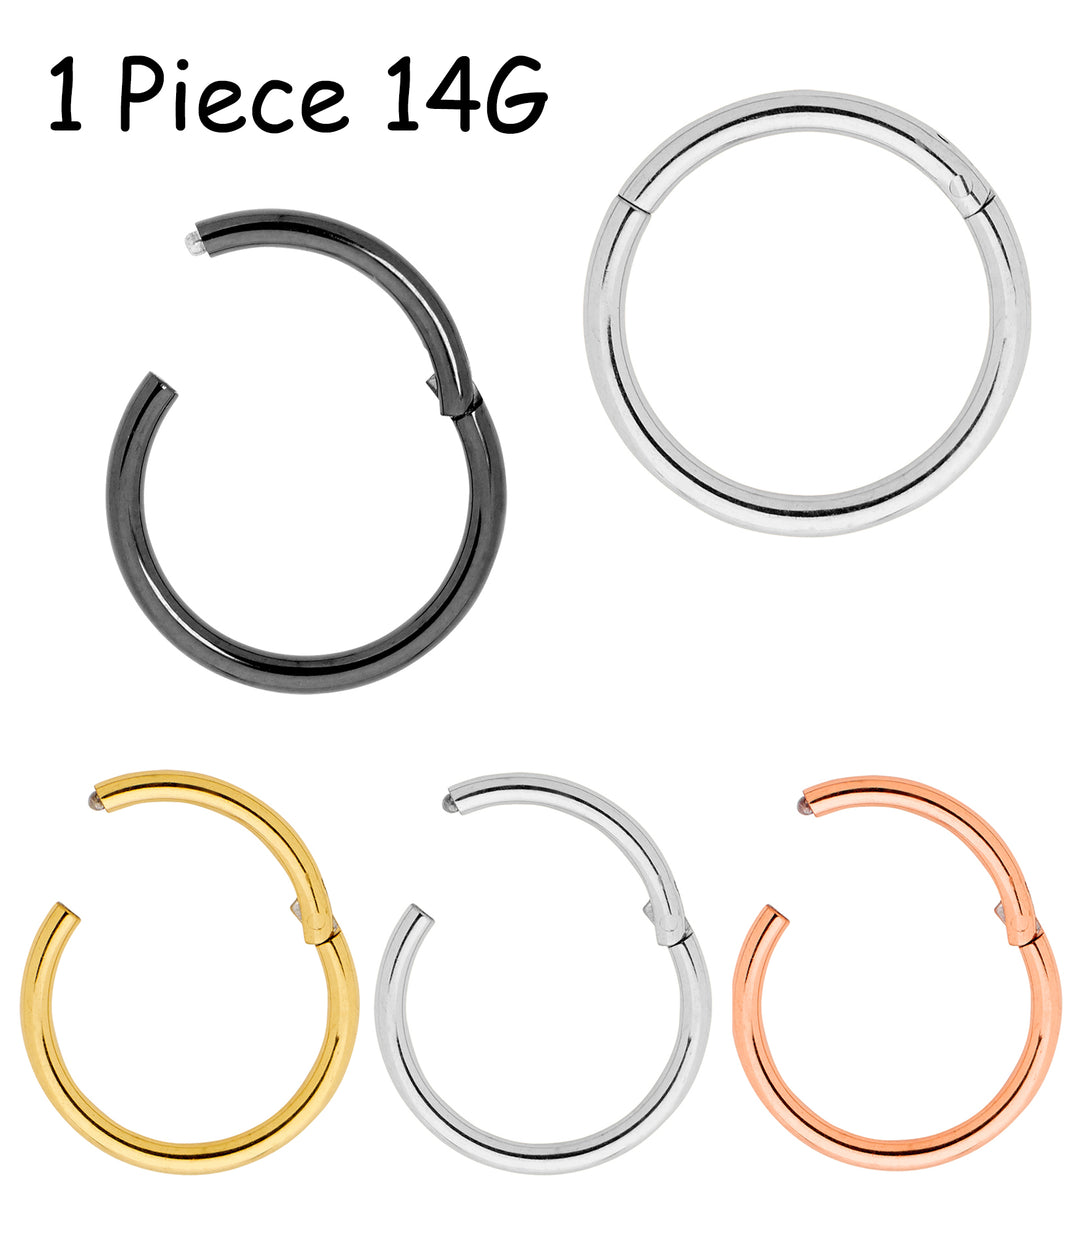 1 Piece 14G Stainless Steel Polished Hinged Hoop Segment Nose Ring Earring 6mm – 12mm